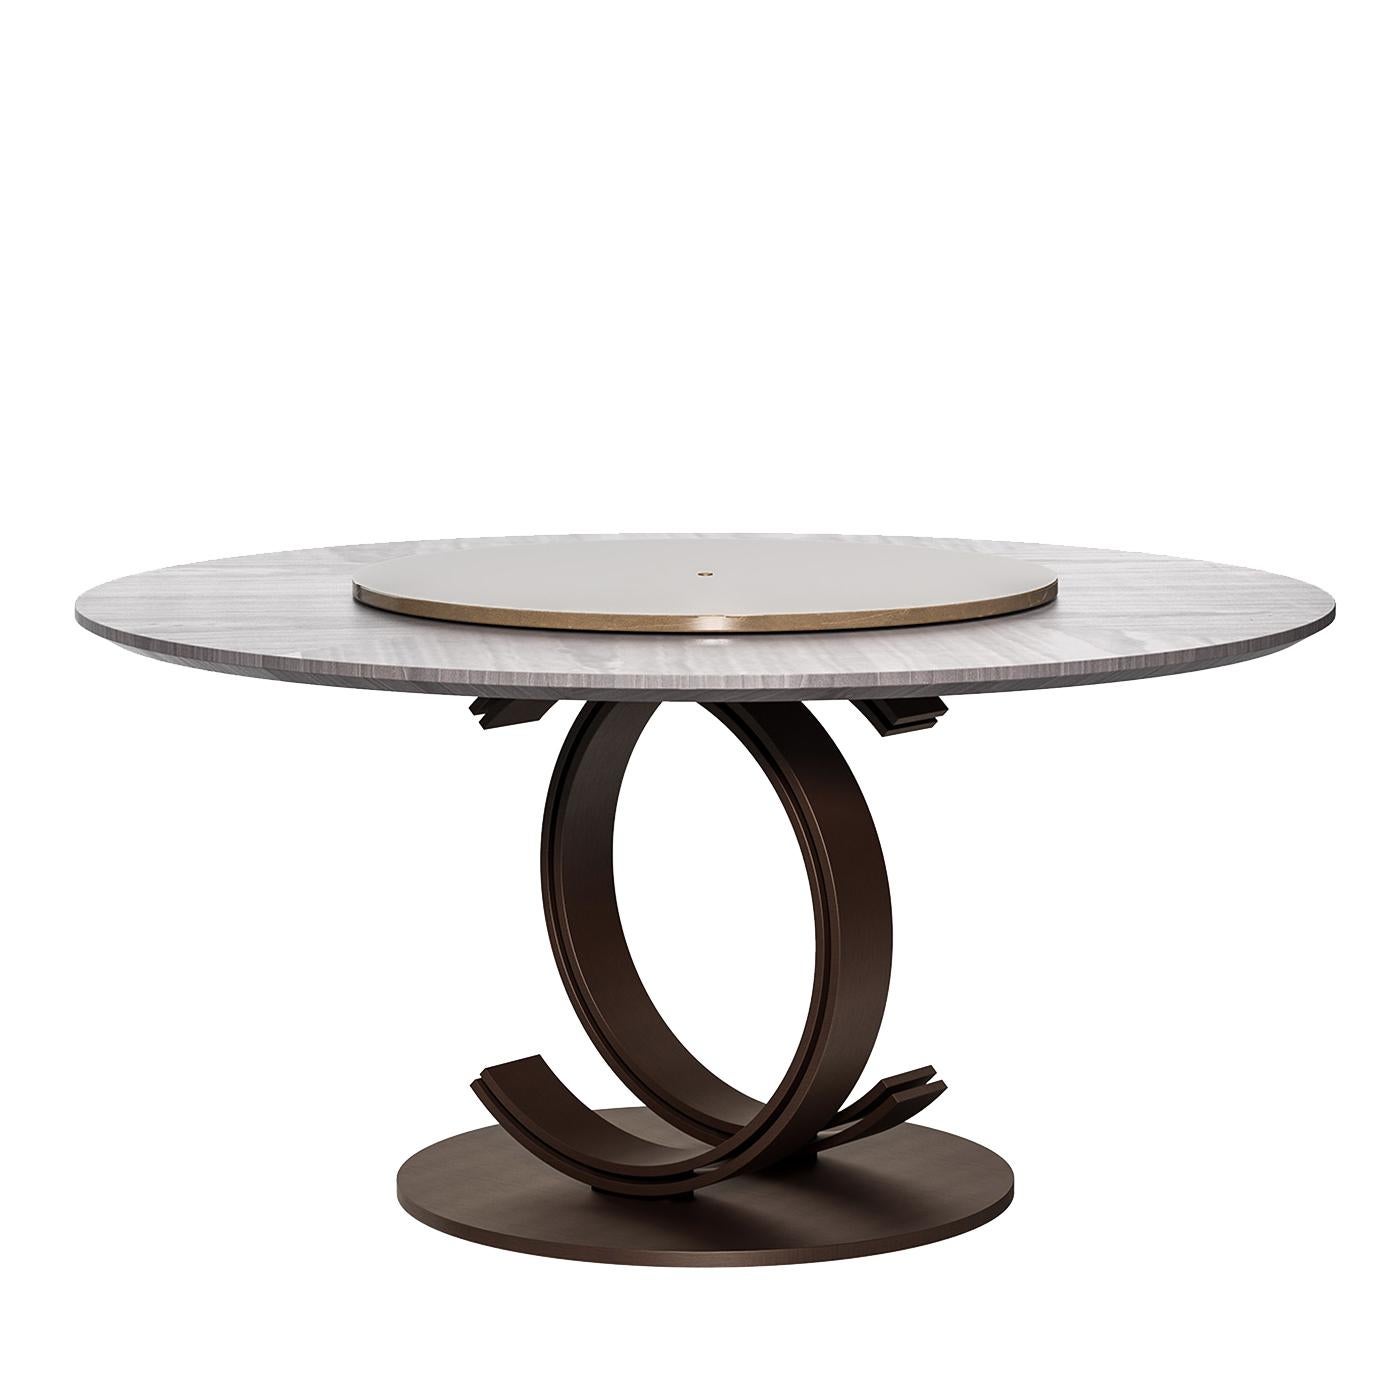 dining table with lazy susan in middle